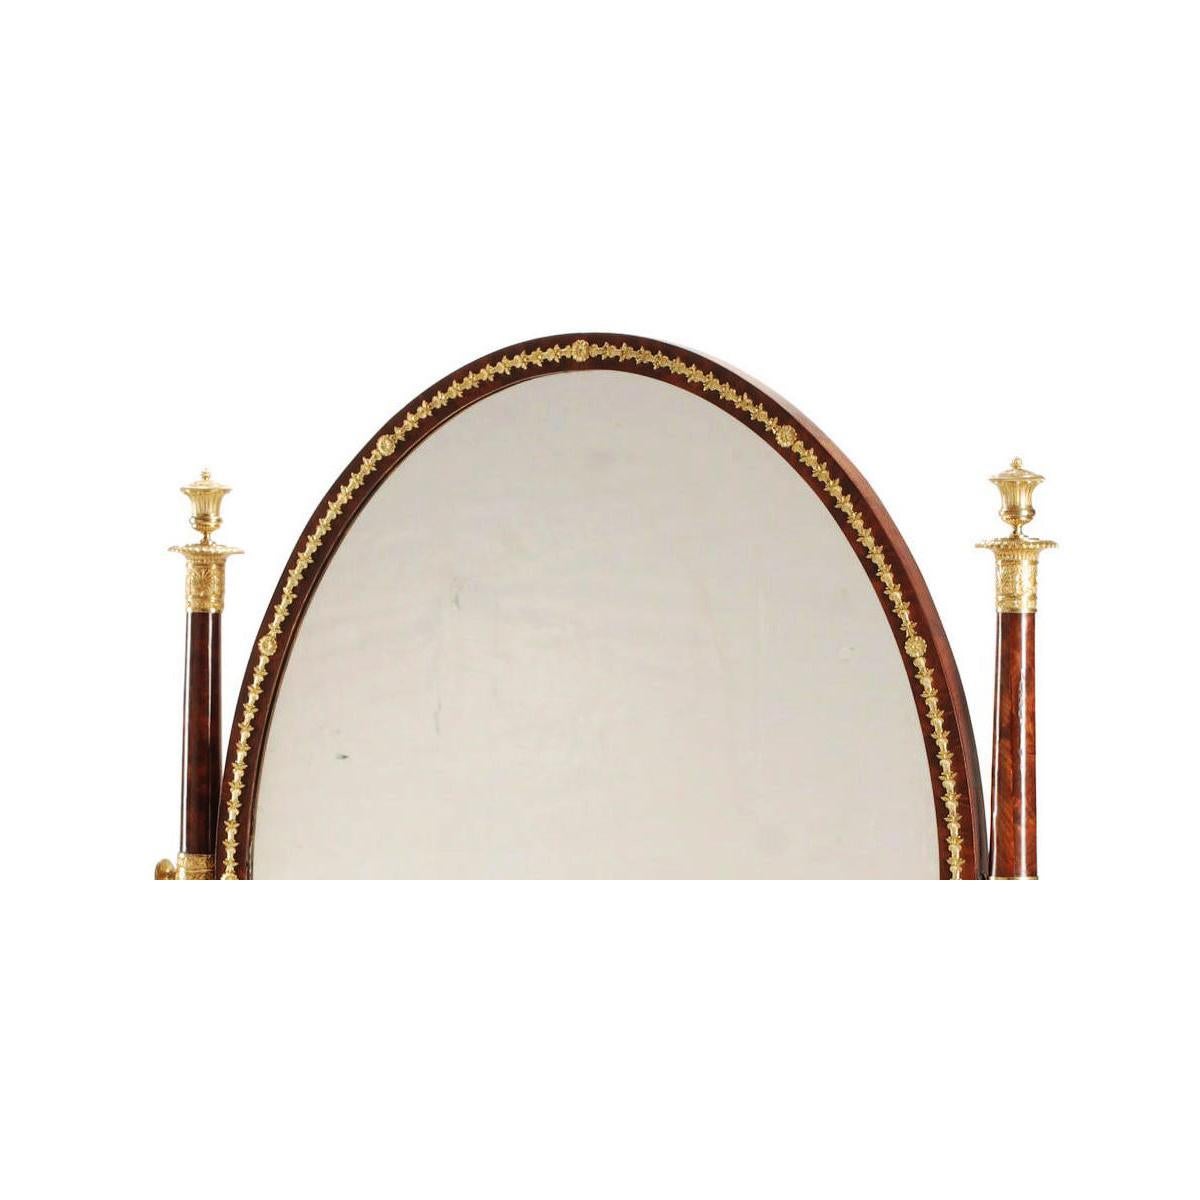 A very fine French 19th century Napoleon III Empire style mahogany and ormolu-mounted freestanding Cheval swiveling mirror. The oval framed mirror plate surmounted with Empire style gilt bronze laurel wreaths, flanked by twin supports decorated with